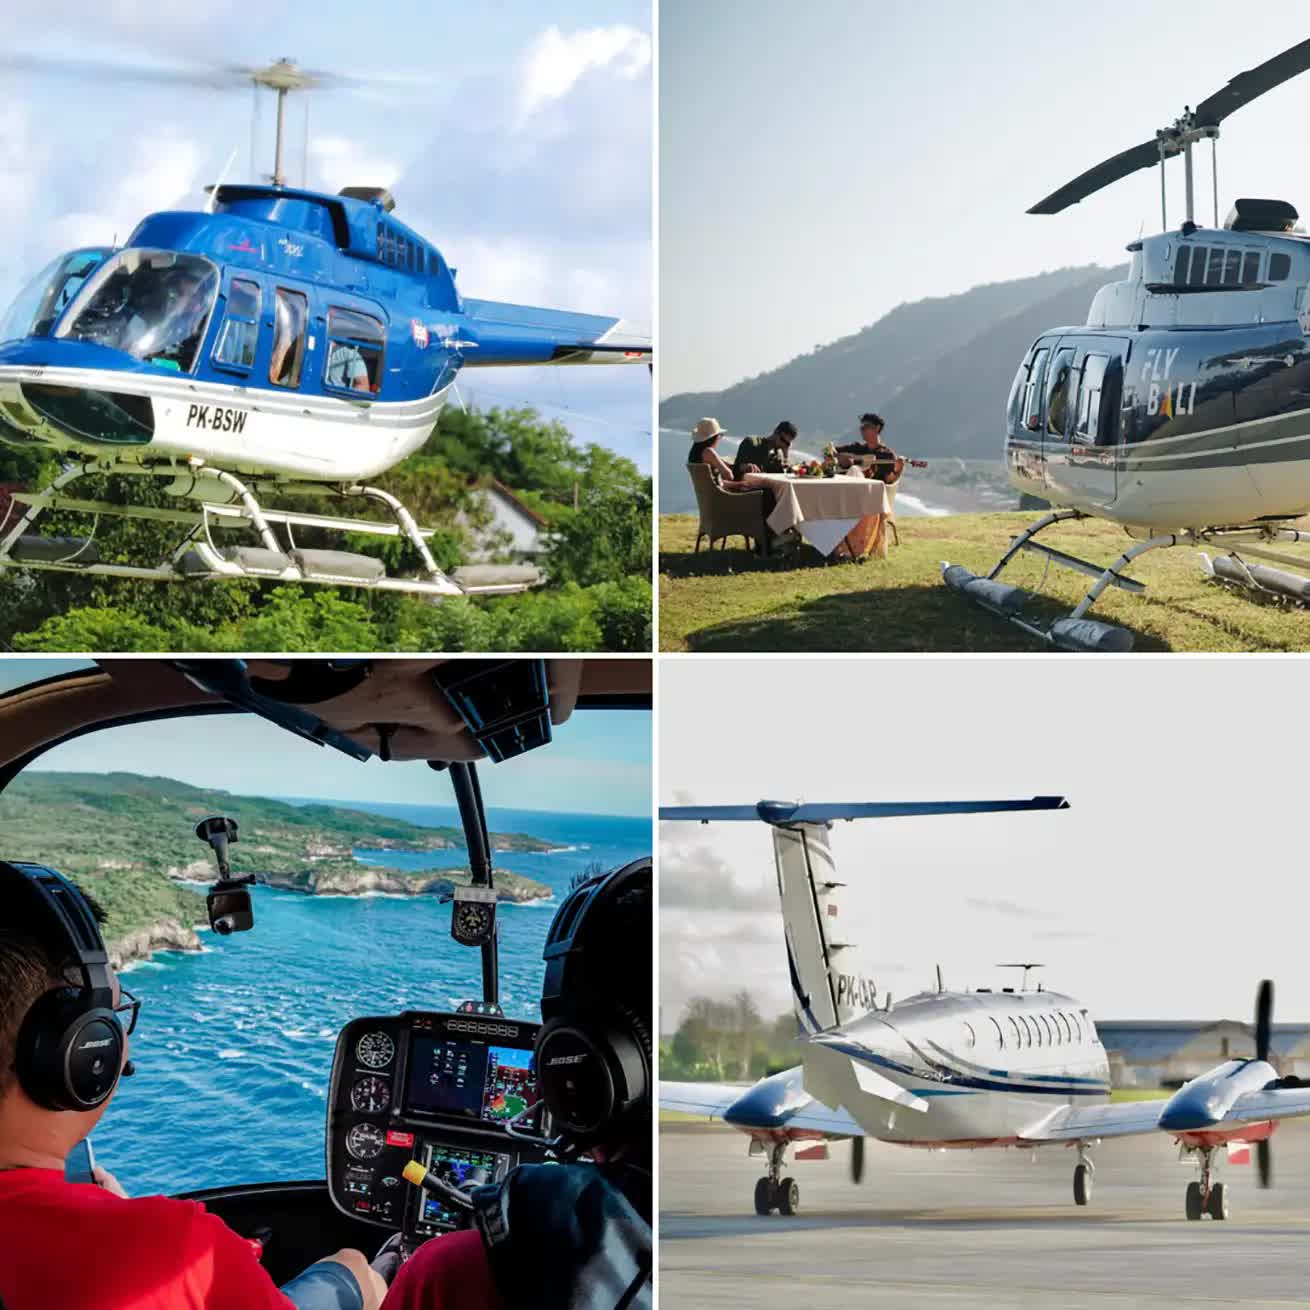 Fly Bali Heliport helicopter takes off